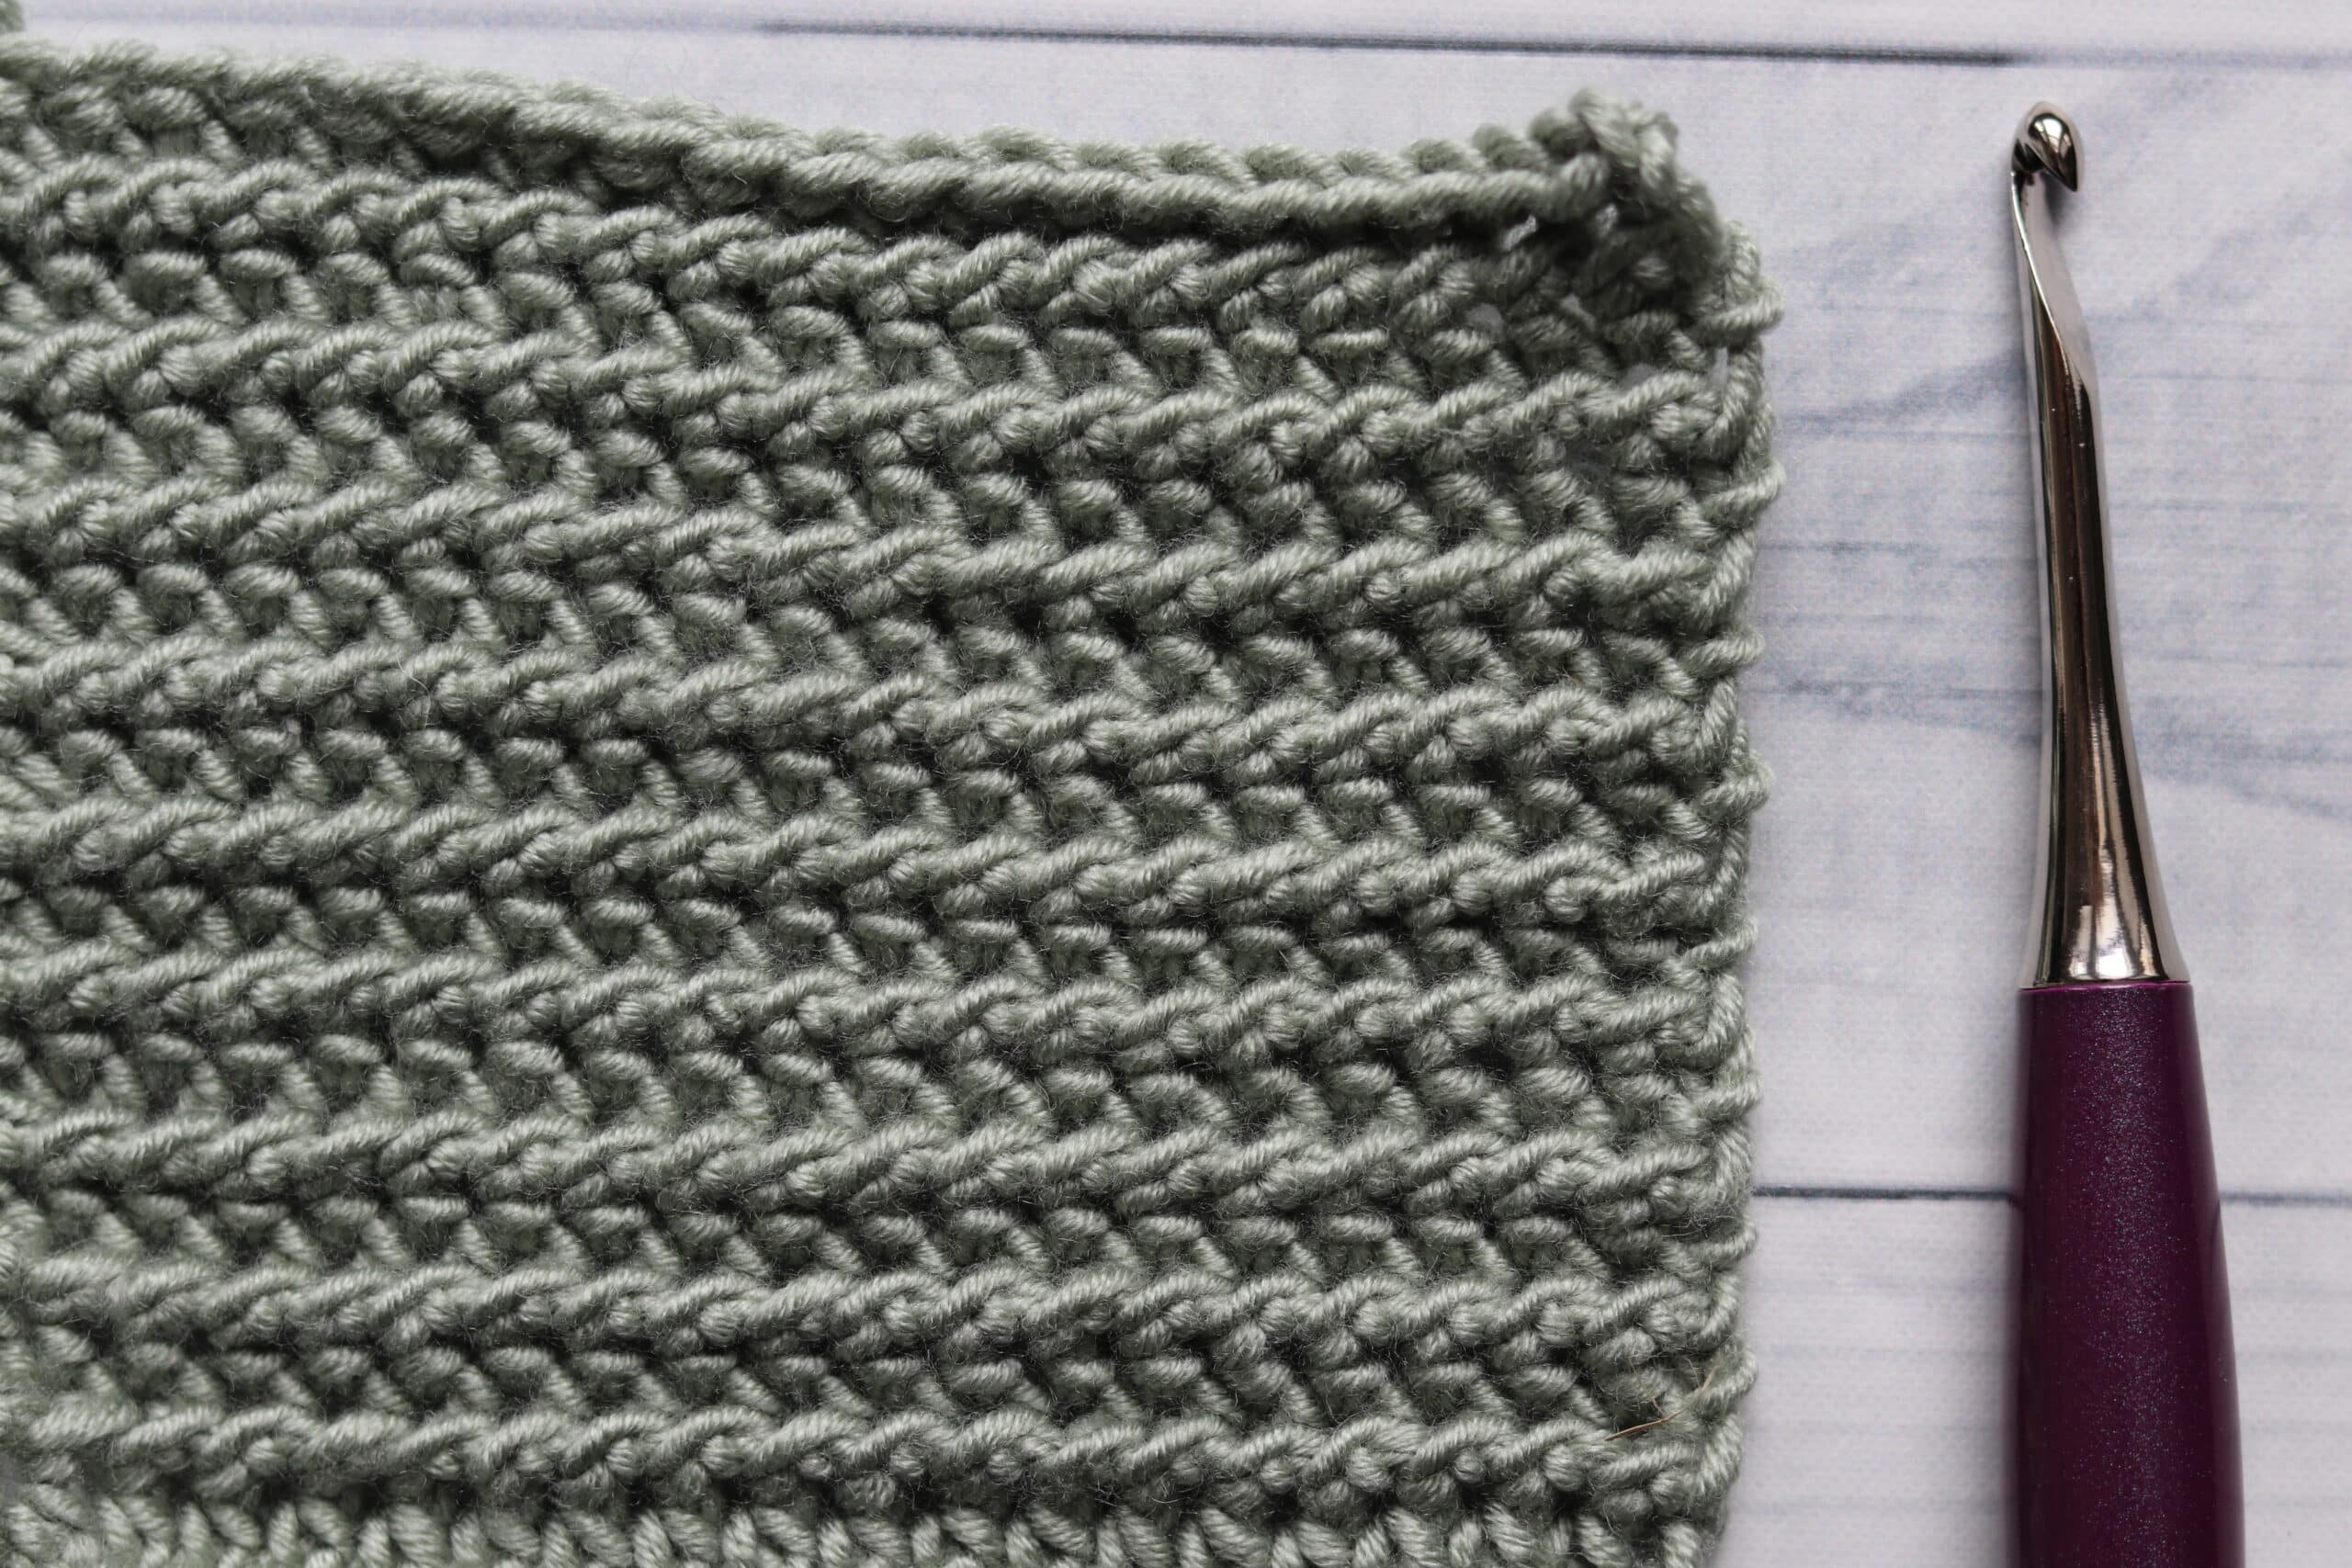 How To Skip A Stitch In Crochet